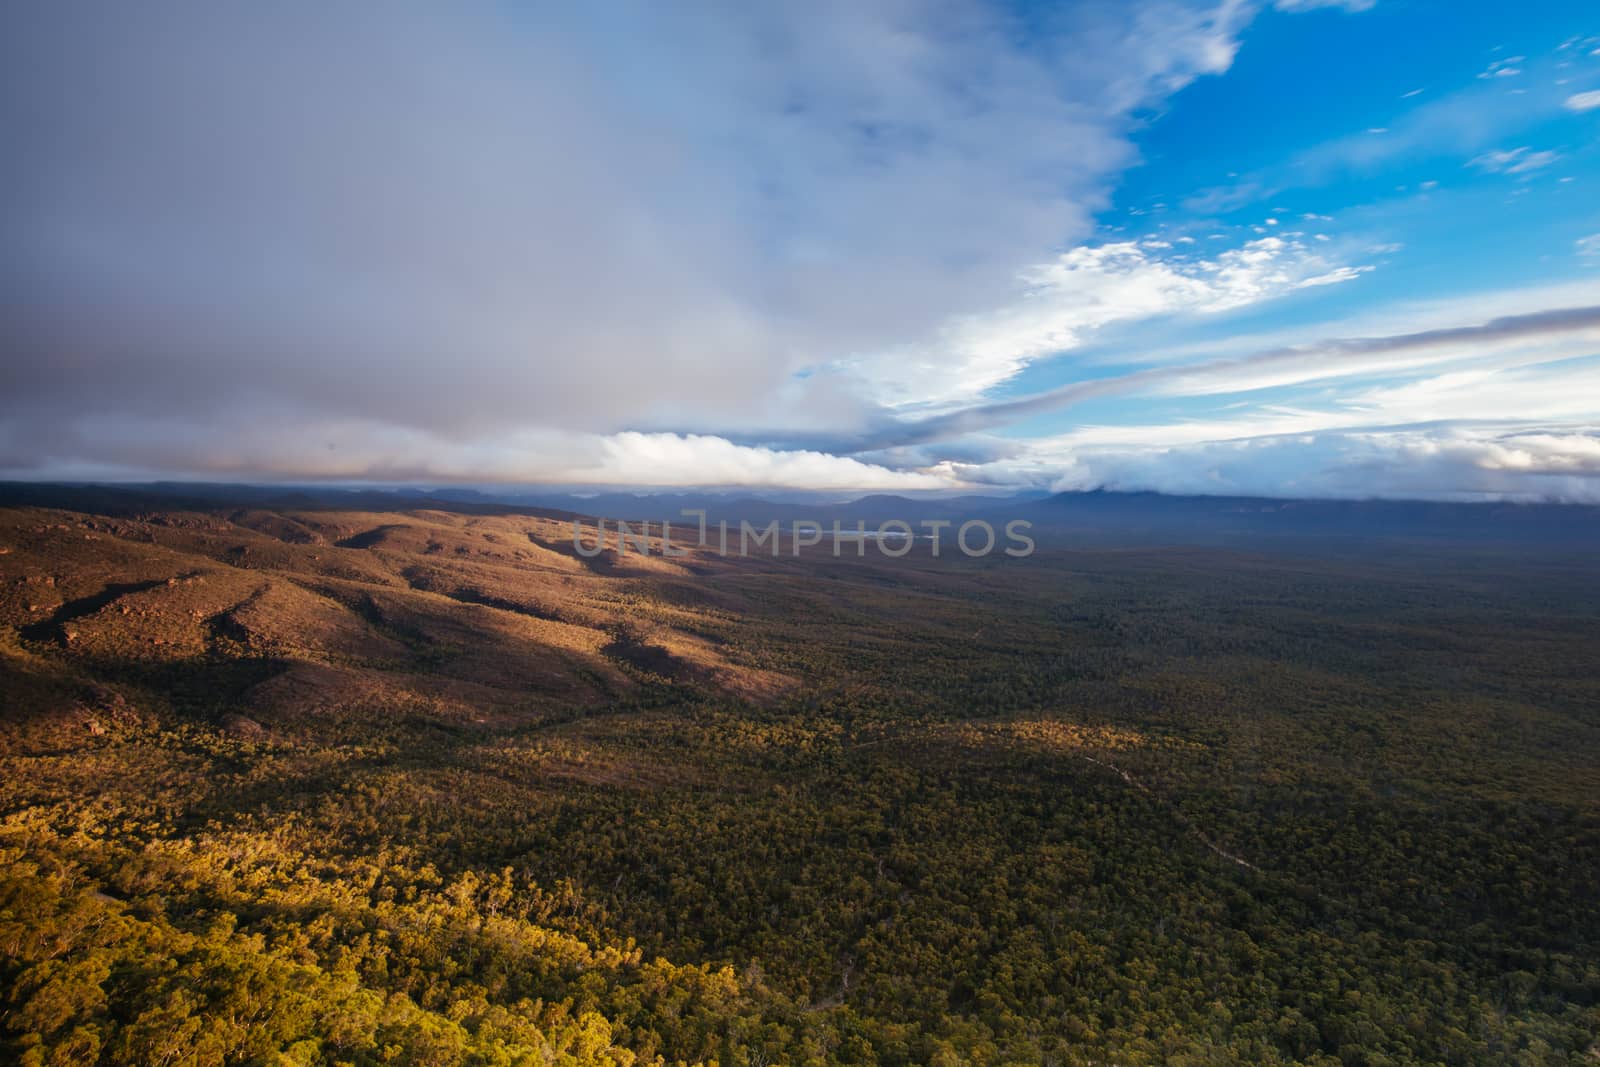 The view from Reeds Lookout and fire tower at sunset in the Grampians, Victoria, Australia